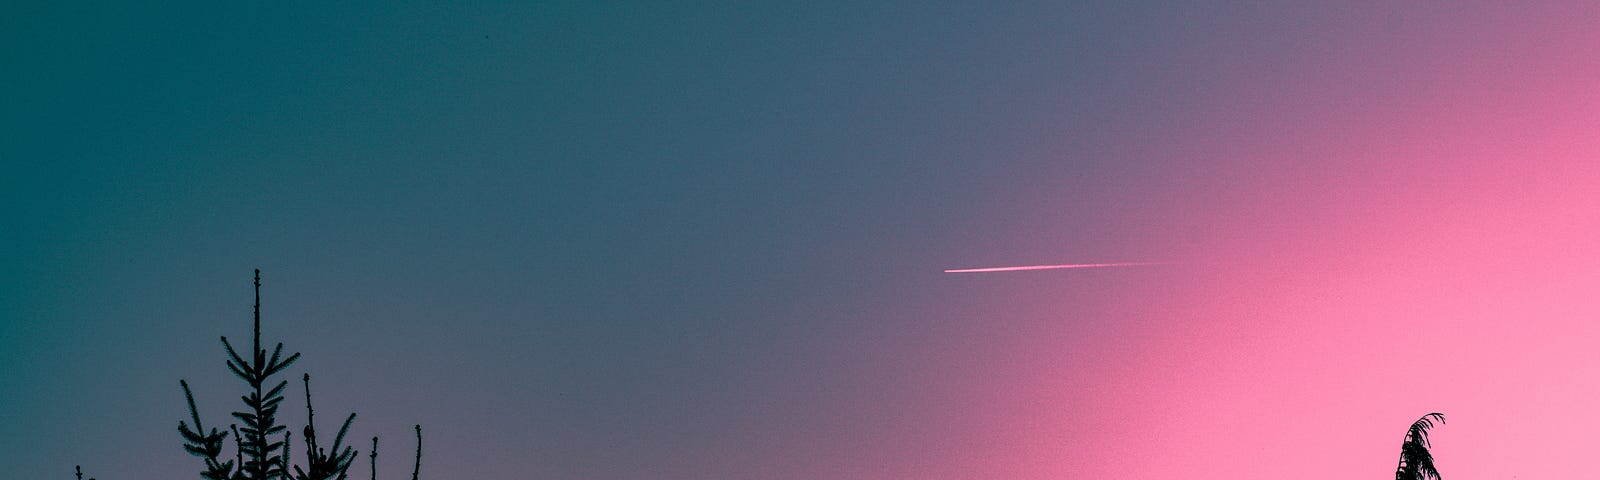 A pink shaded sky with a plane.